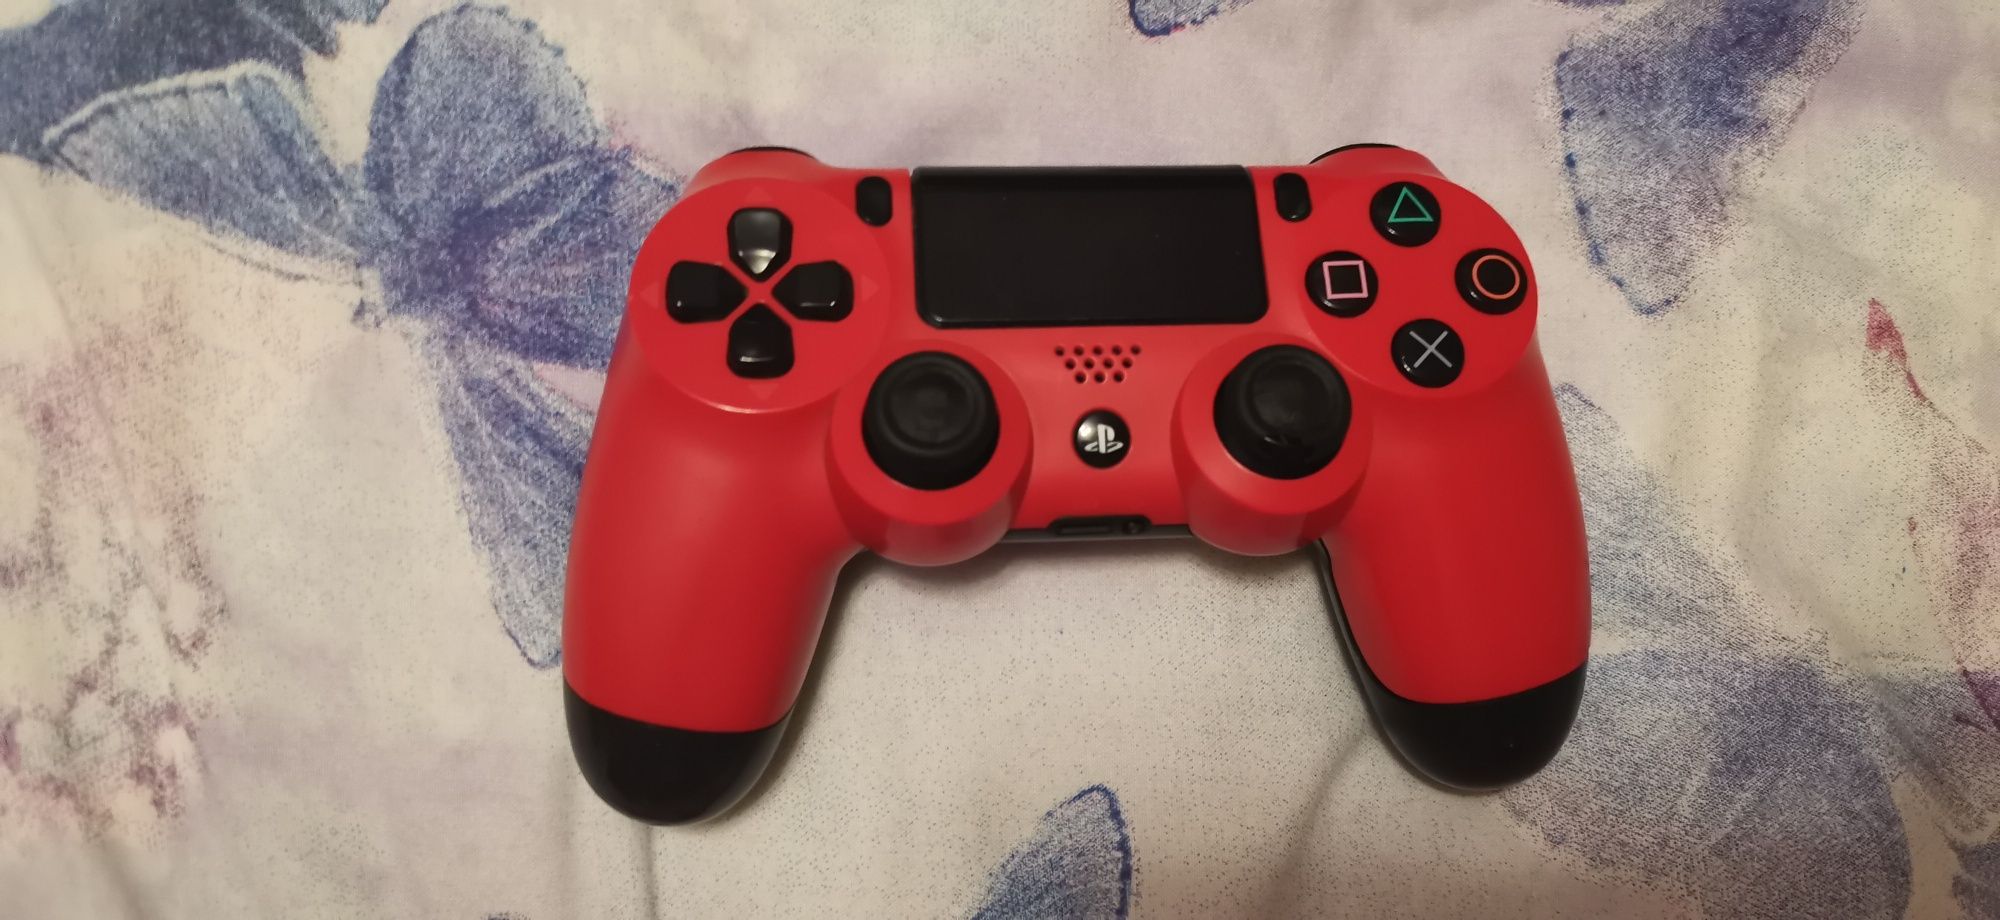 Controller ps4, playstation, pc